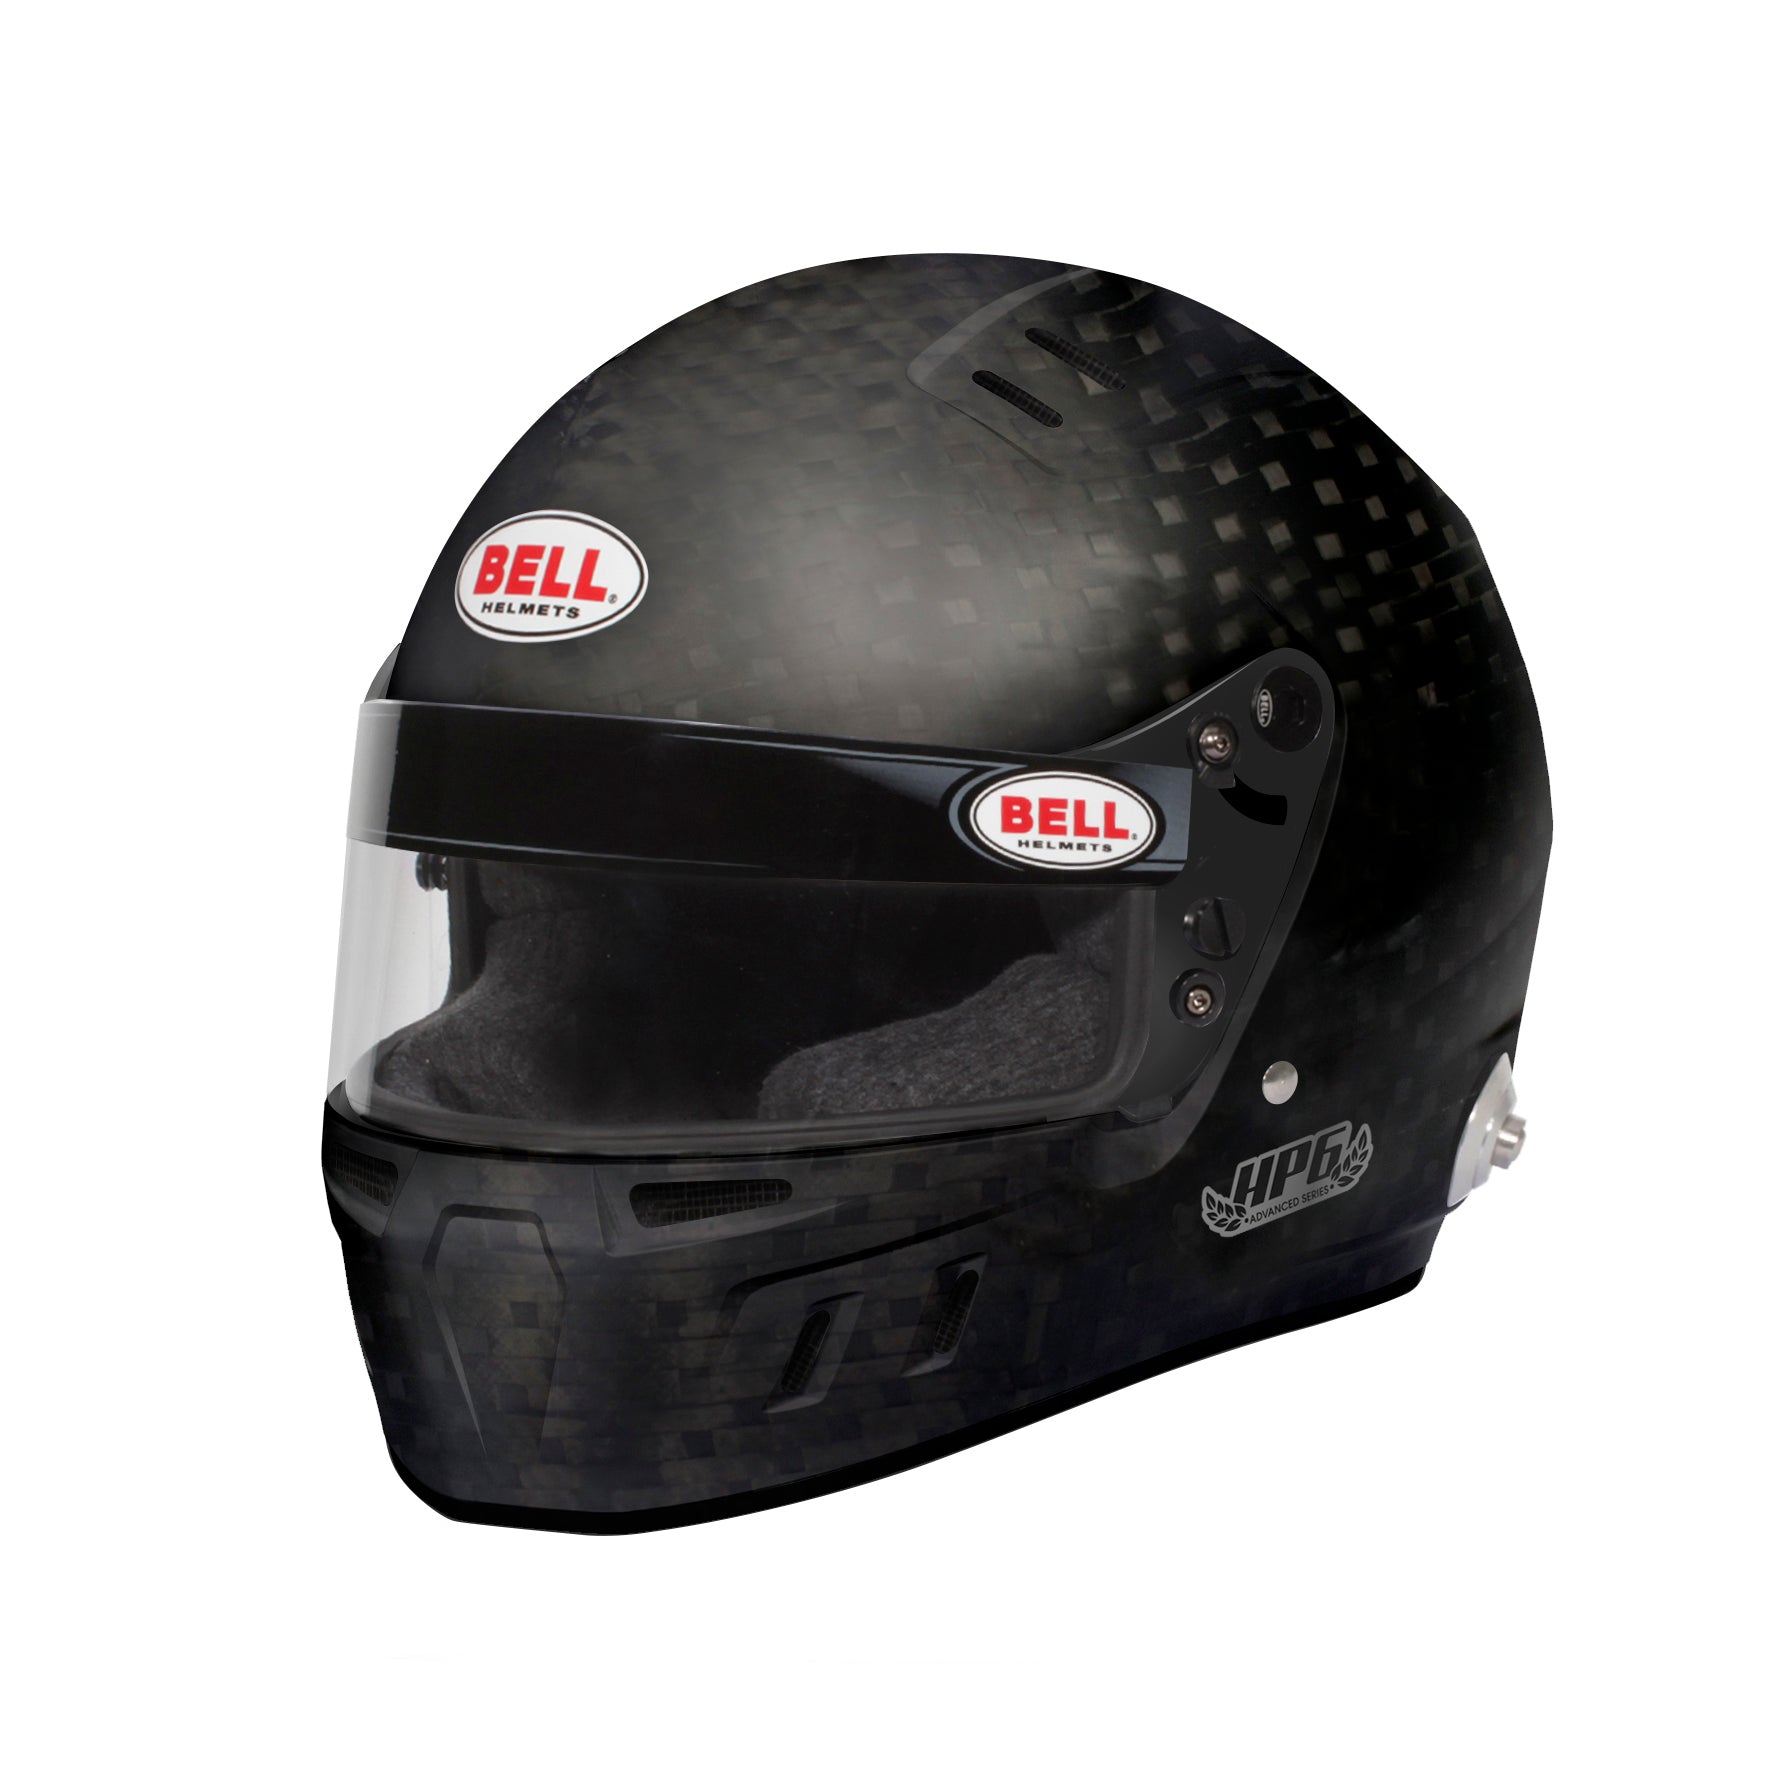 BELL 1140011 HP6 RD Racing helmet full-face, HANS, FIA8860-2018, carbon, size 55 (6 7/8) Photo-0 